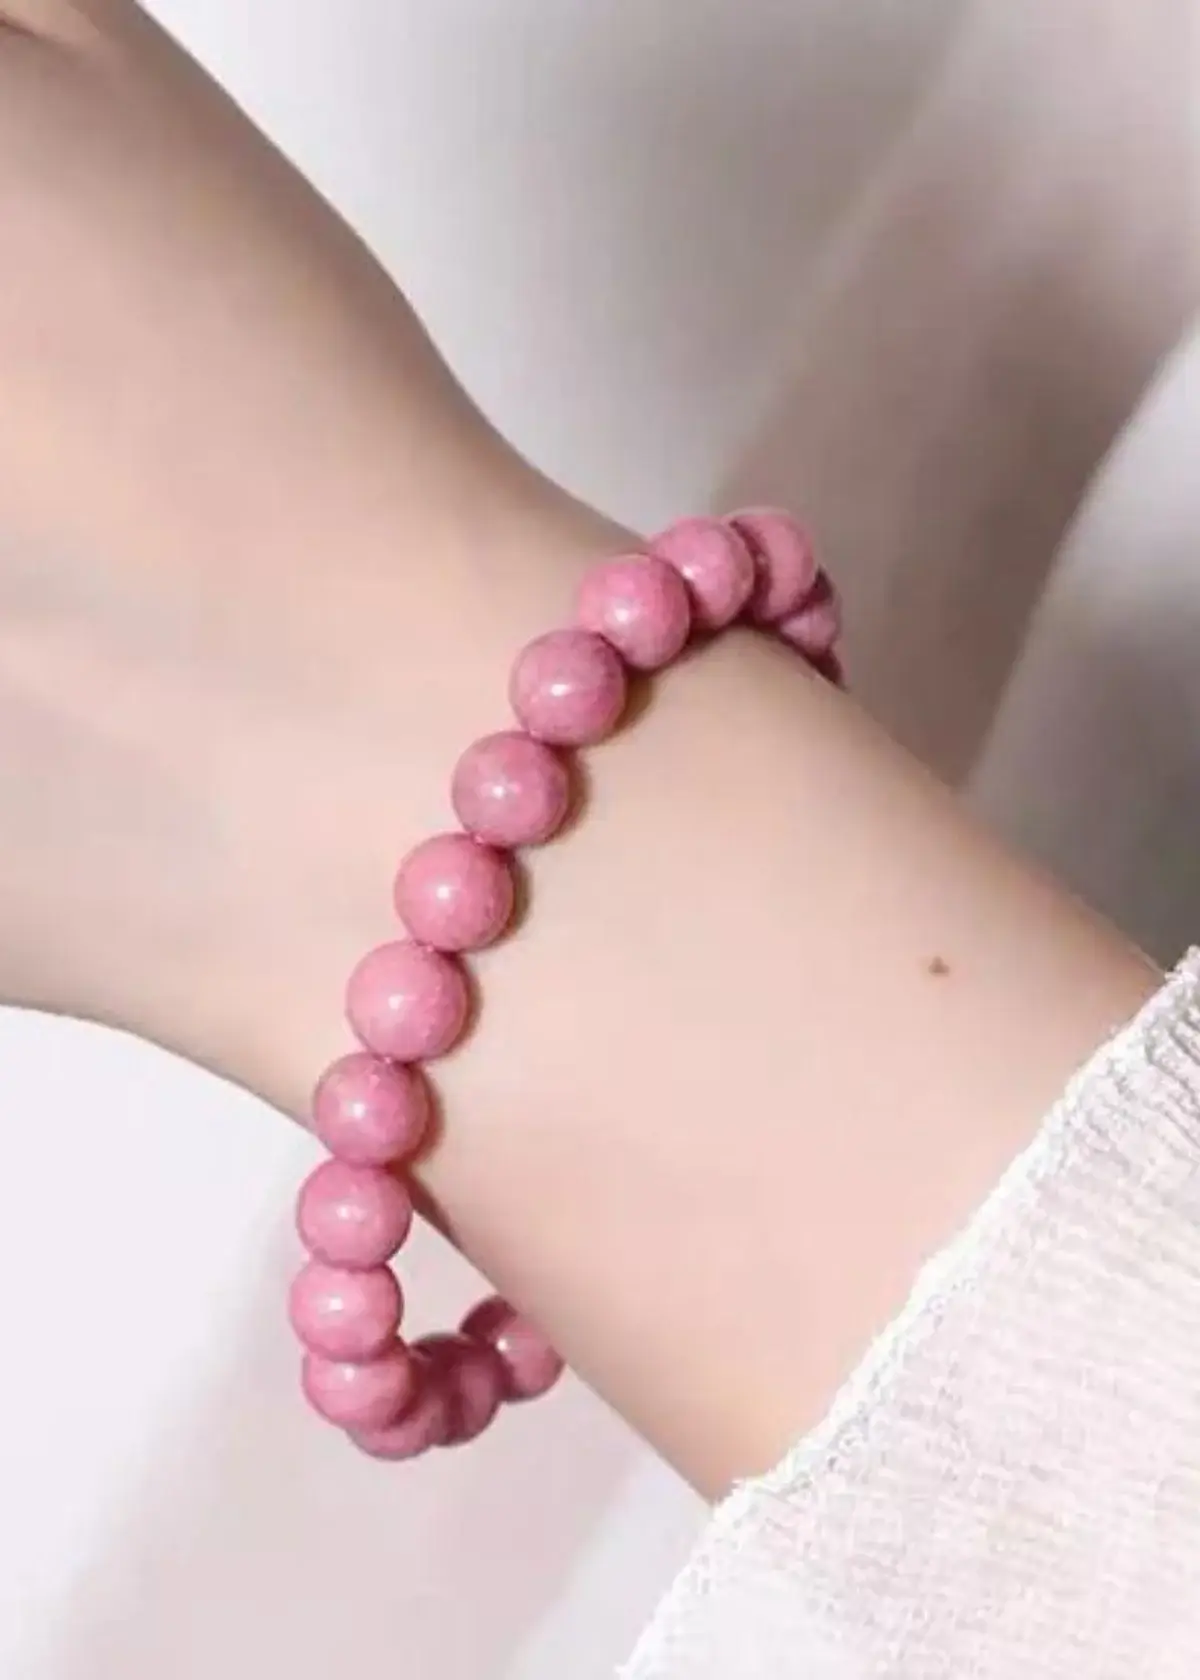 How to Choose the Right Rhodonite Bracelet?